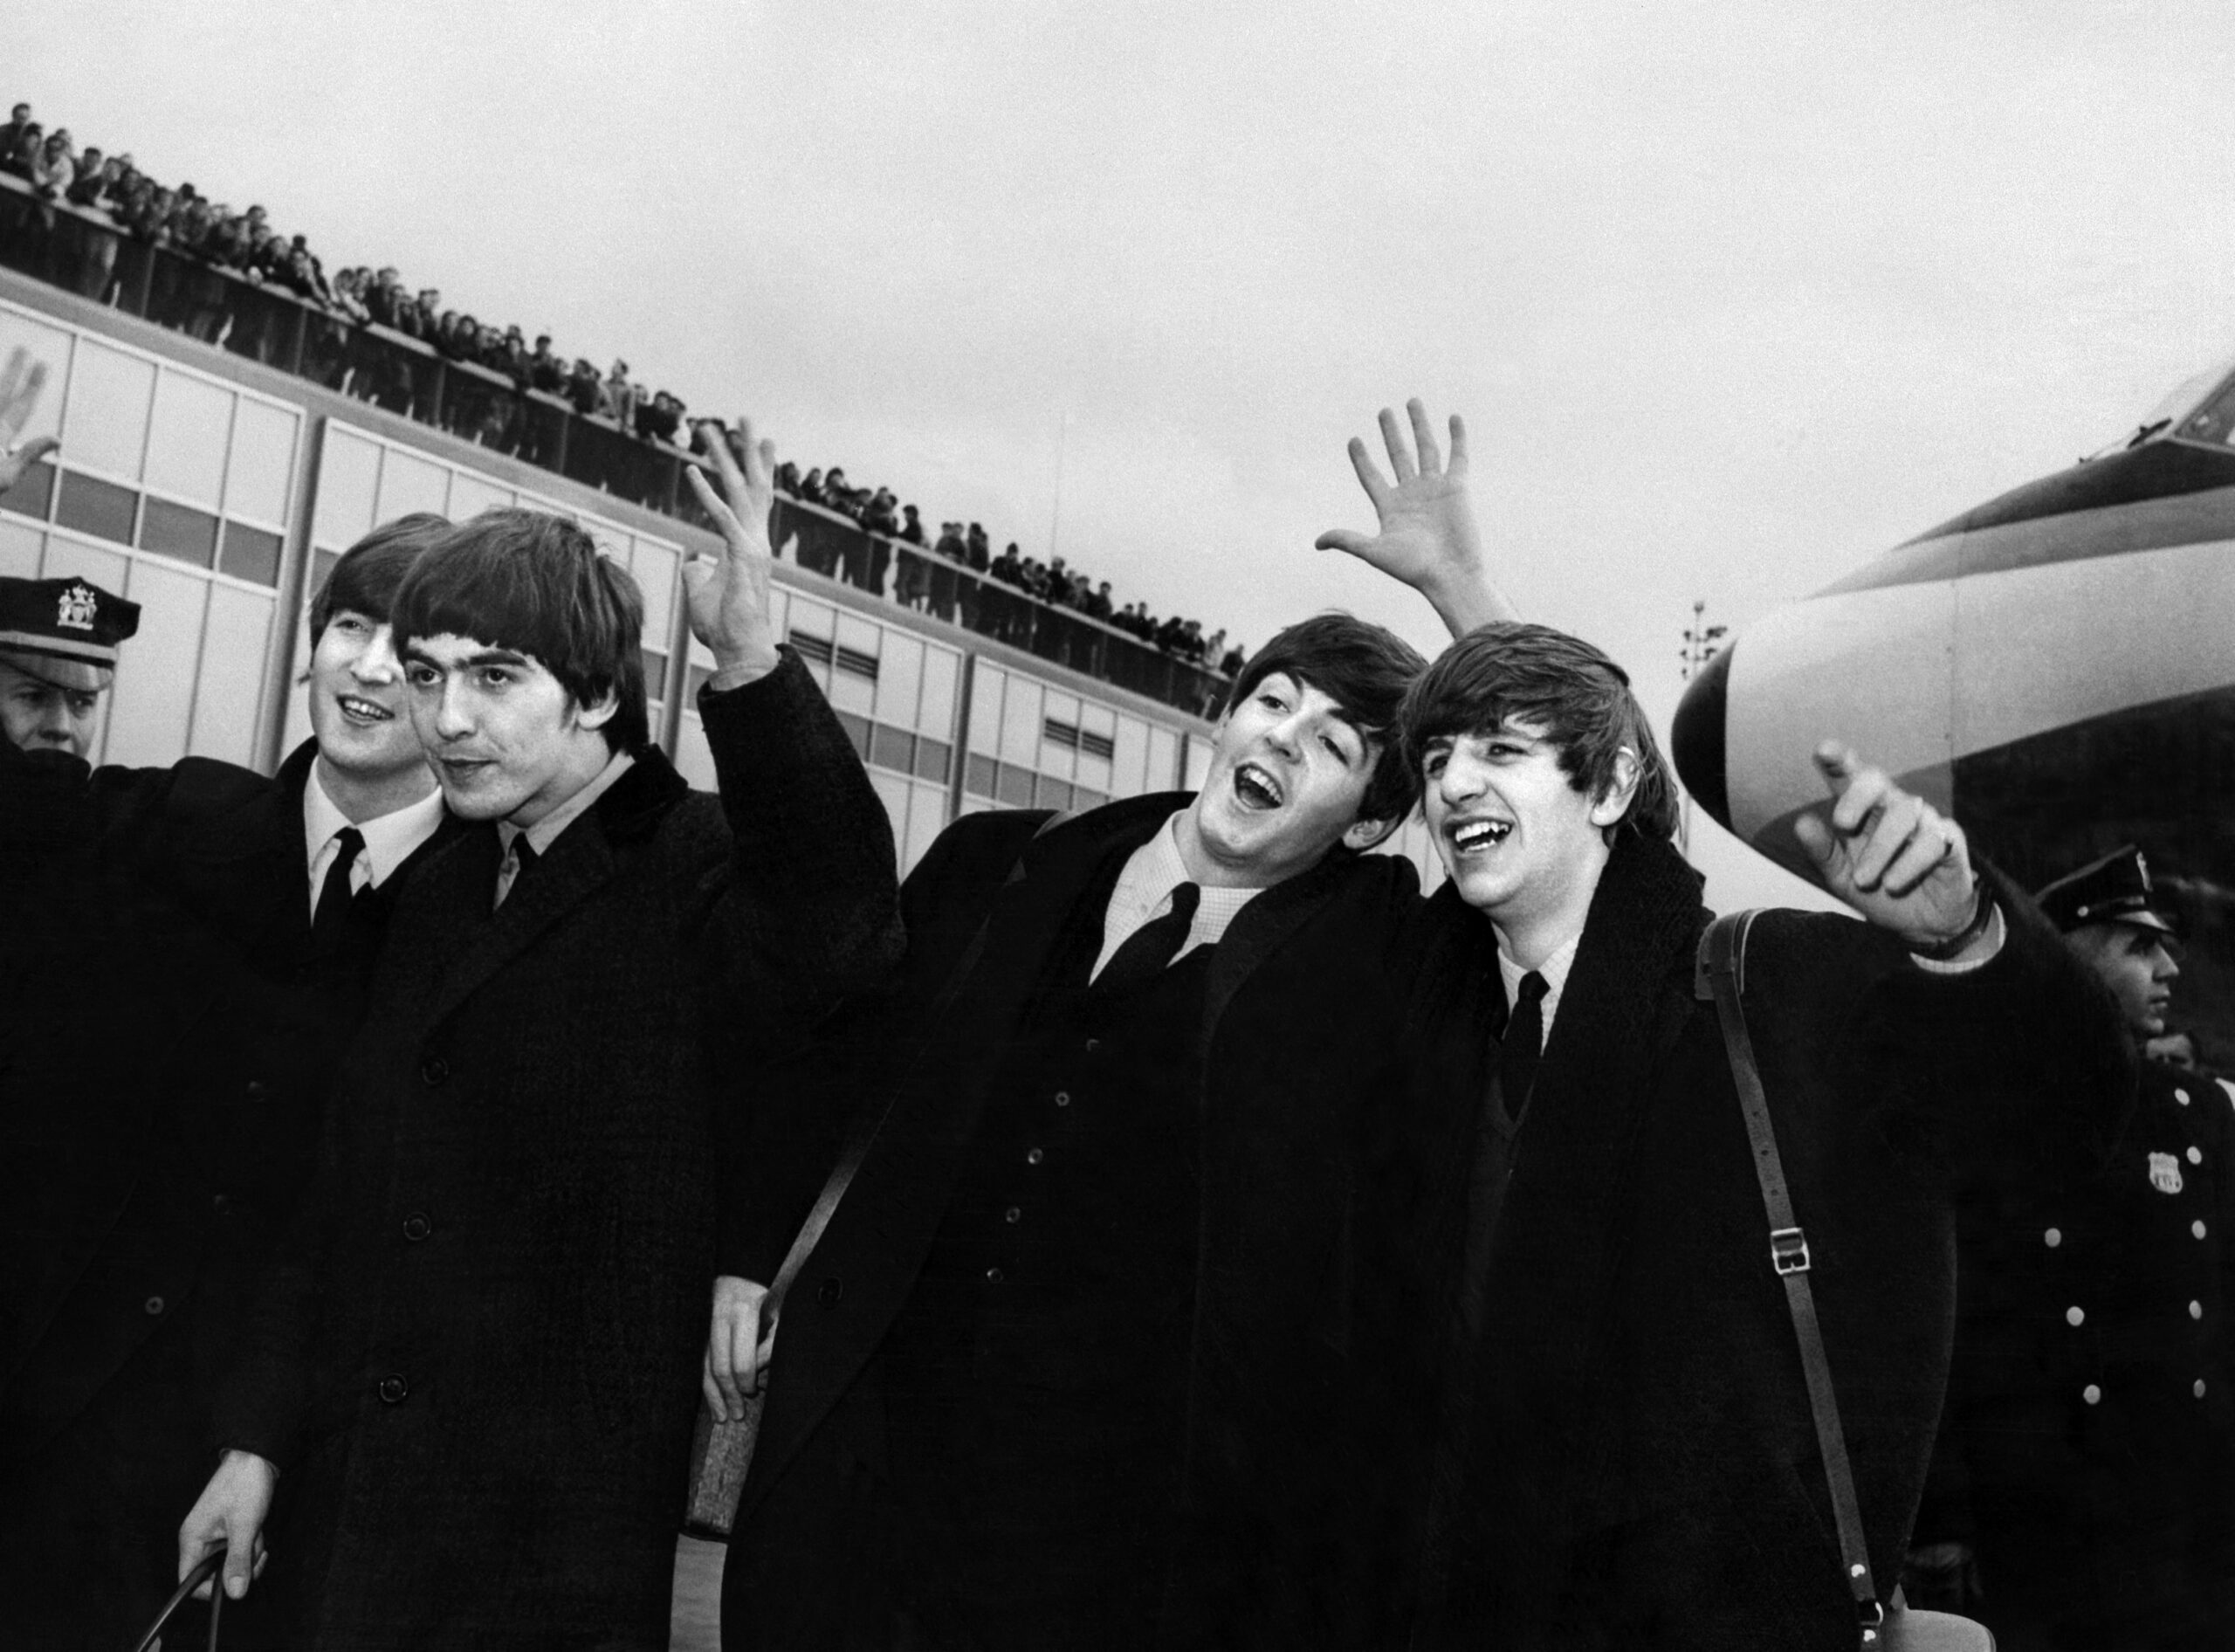 English band the Beatles with, from left to right, John Lennon, Ringo Starr, Paul McCartney and George Harrison, arrive at John F. Kennedy Airport in New York, United States, where they're greeted by a large crowd on February 7, 1964. Beatlemania hit the United States after The Beatles performed on The Ed Sullivan Show in February 09, 1964. A new Beatles song produced with a little help from artificial intelligence and including the vocals of John Lennon will be released on November 2, 2023, more than four decades after it was originally recorded as a demo. "Now And Then", first written and sung by Lennon in 1978, was finished by his fellow band members Paul McCartney and Ringo Starr -- and AI. (Photo by AFP)